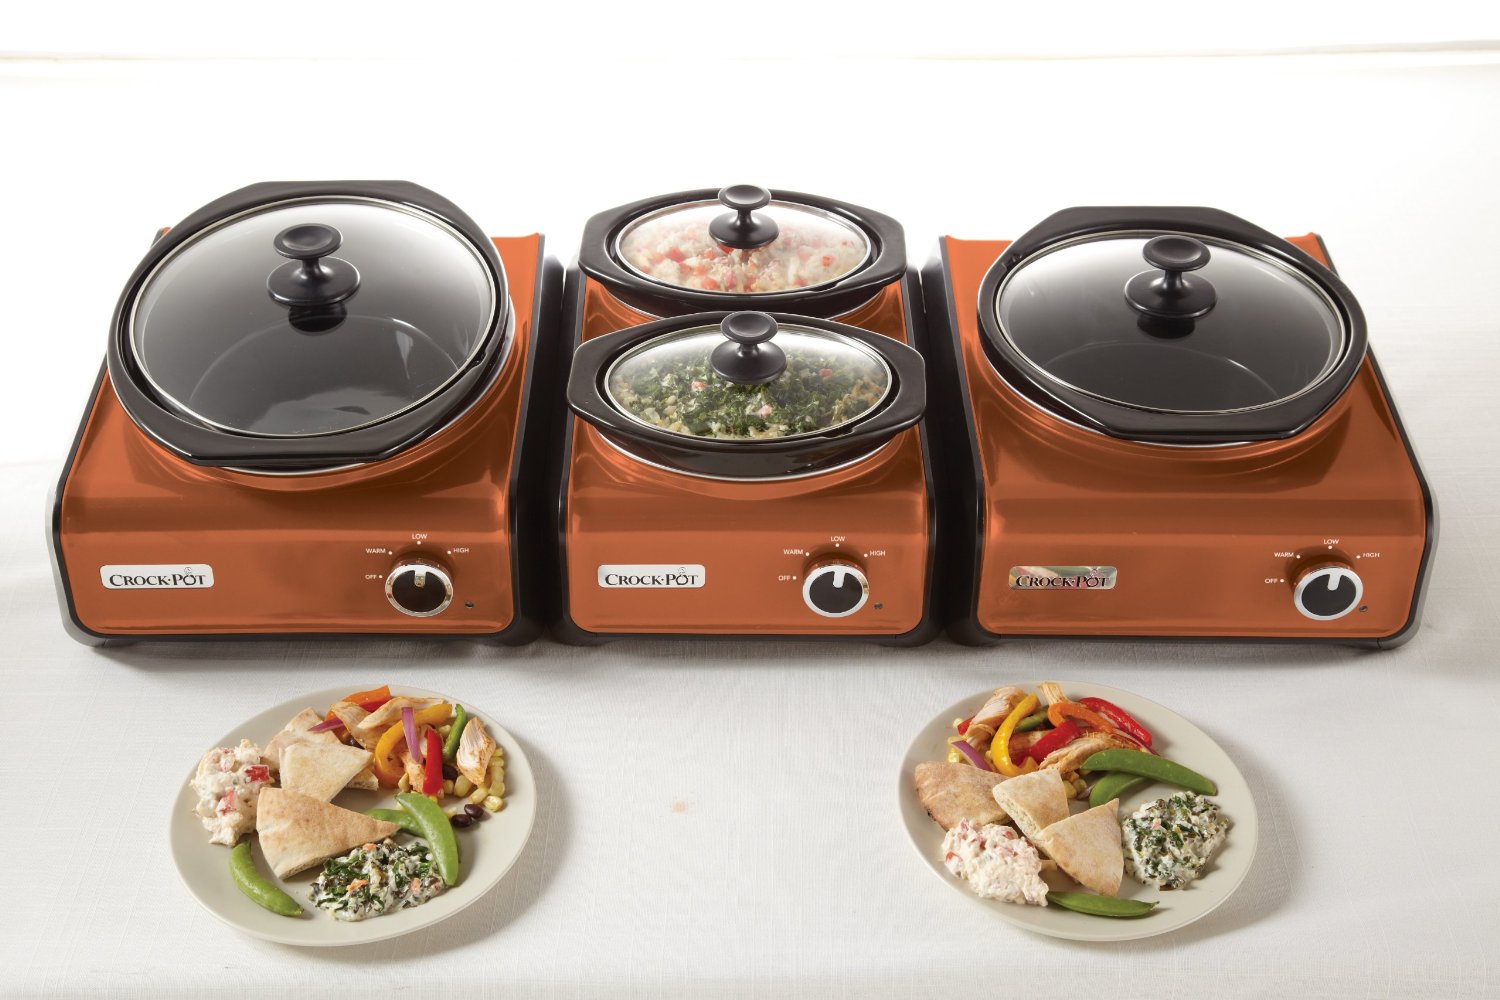 Belkin's Smartphone-Controlled Crock-Pot Doesn't Dish Enough